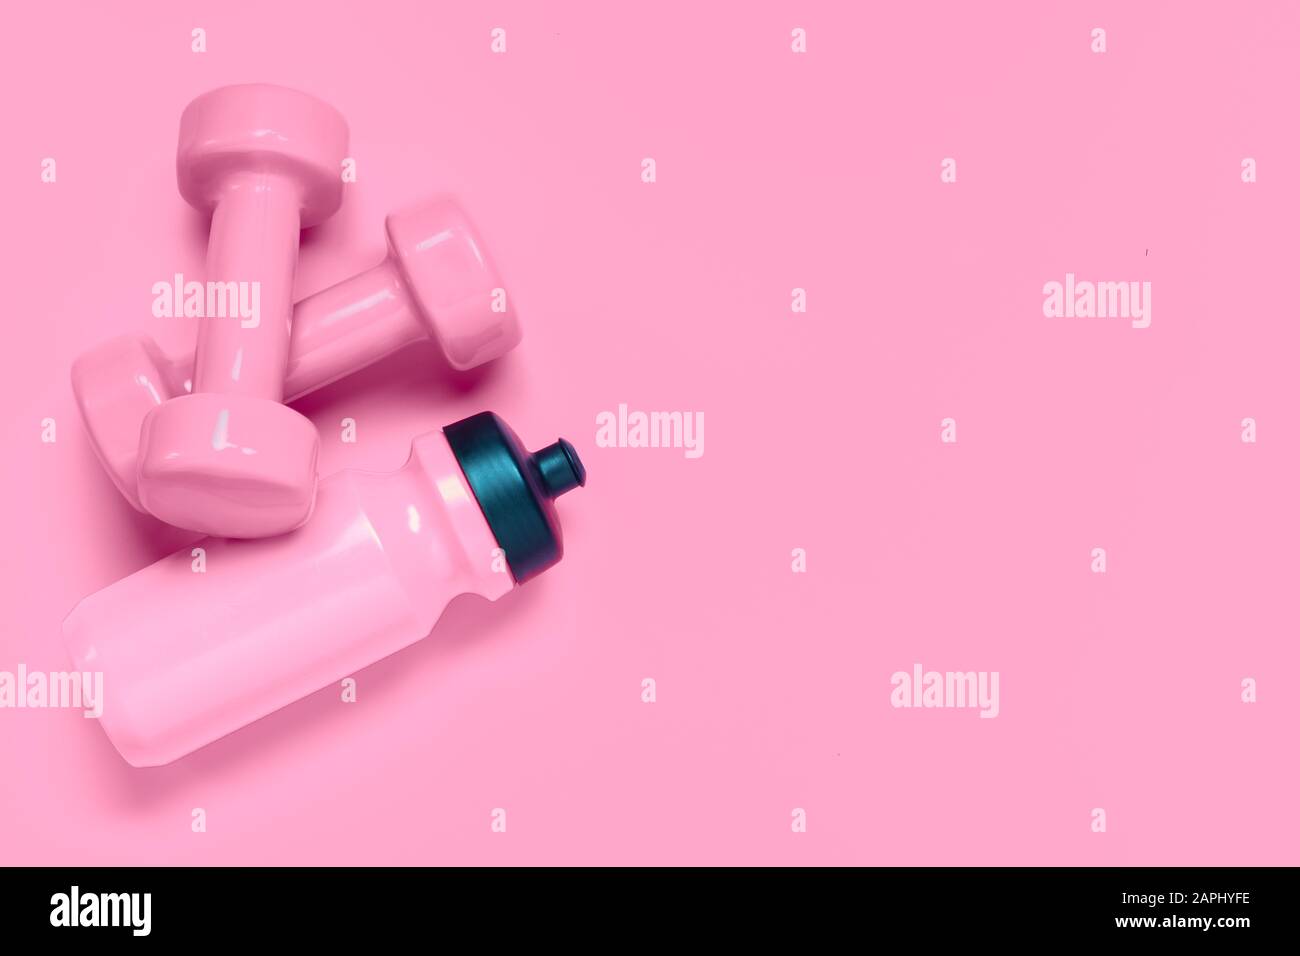 Fitness workout background concept with pink dumbbells and bottle